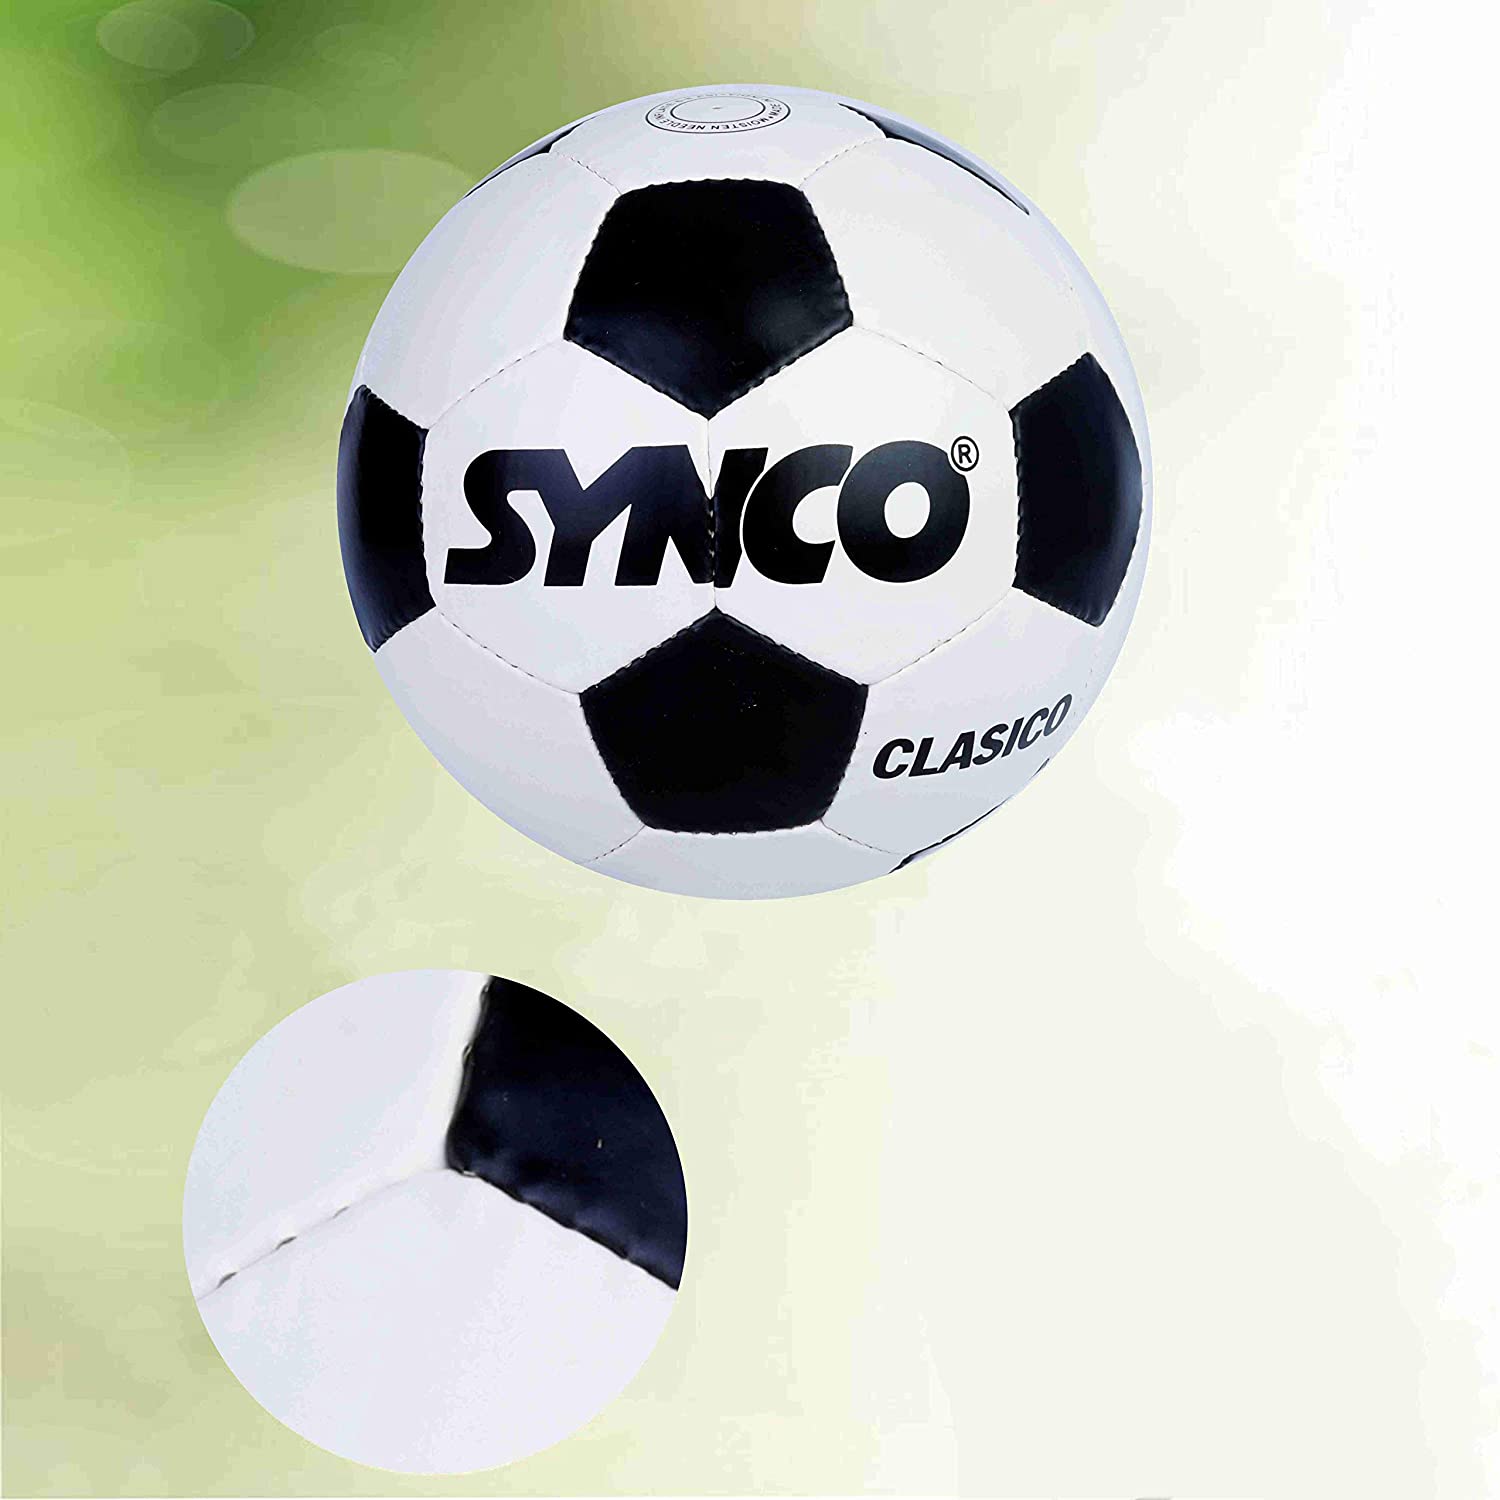 SYNCO World Cup Clasico <br>Rubber Football/Soccer Ball <br>Size-5 White/Black - 5